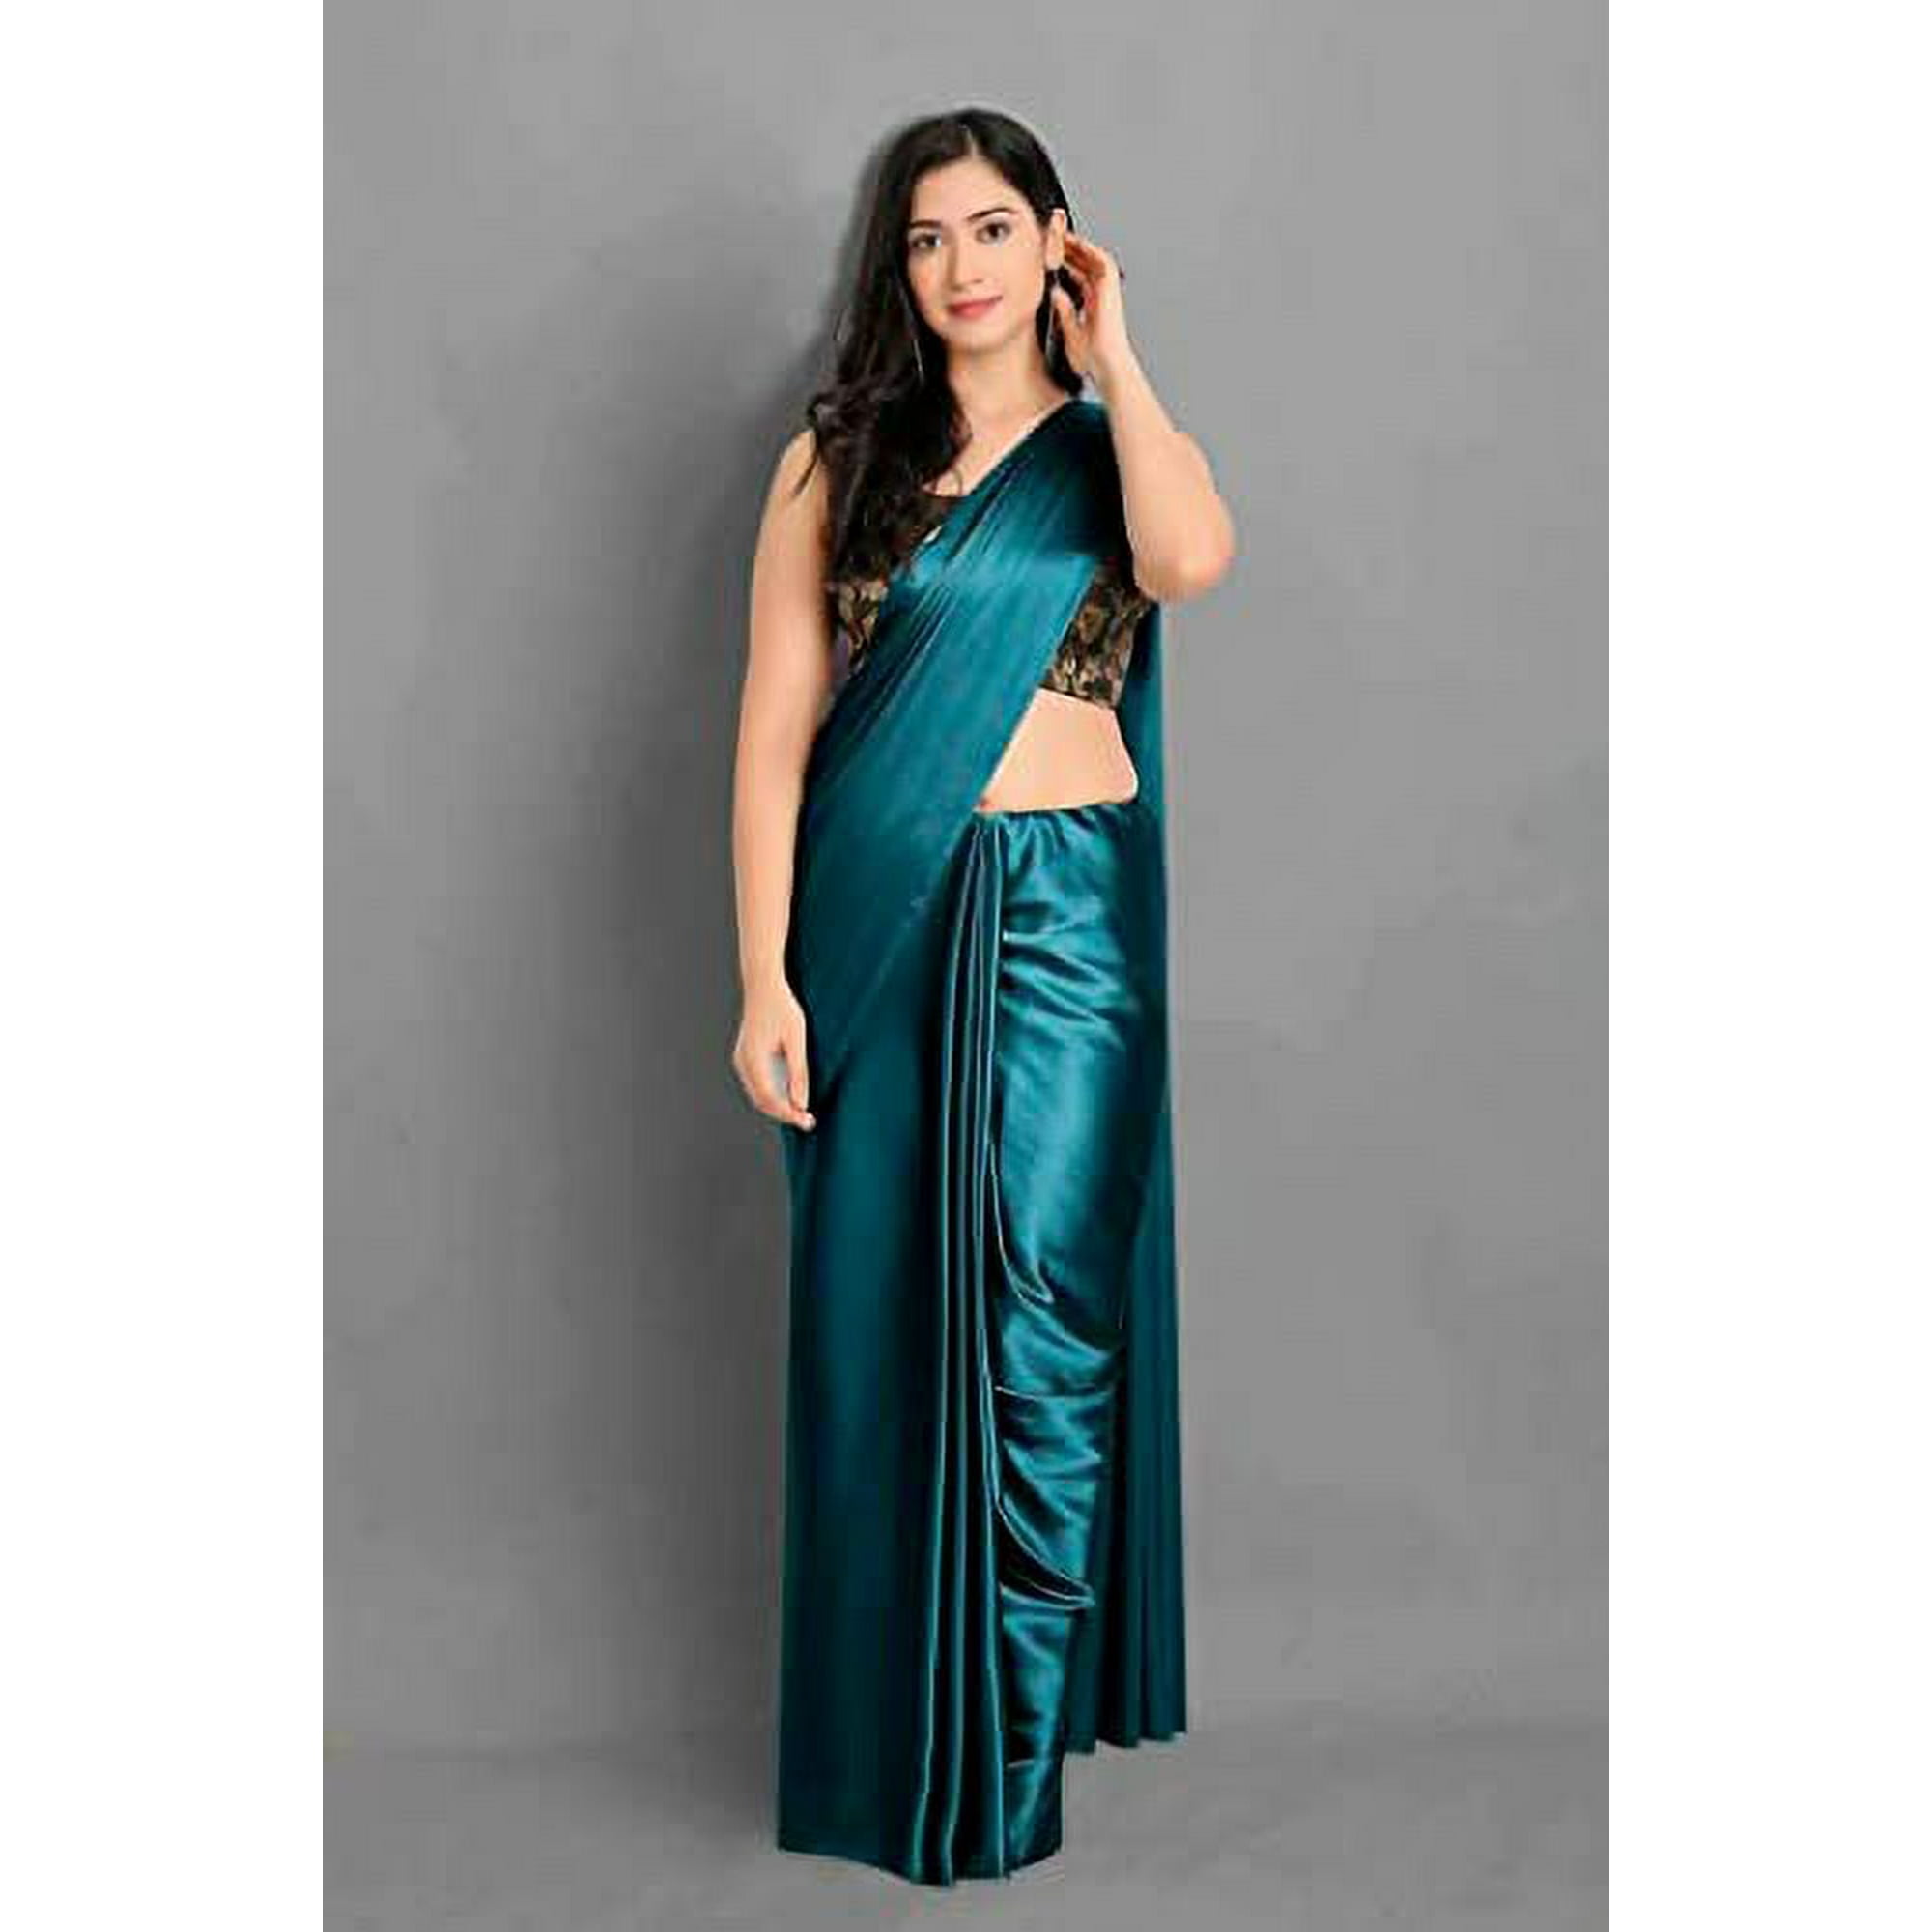 SAI DECORATIVE Women's Indian Traditional Plain Weave Satin Silk Saree  soft, silky and shiny, With Unstitched Blouse Piece Color:- PEACOCK